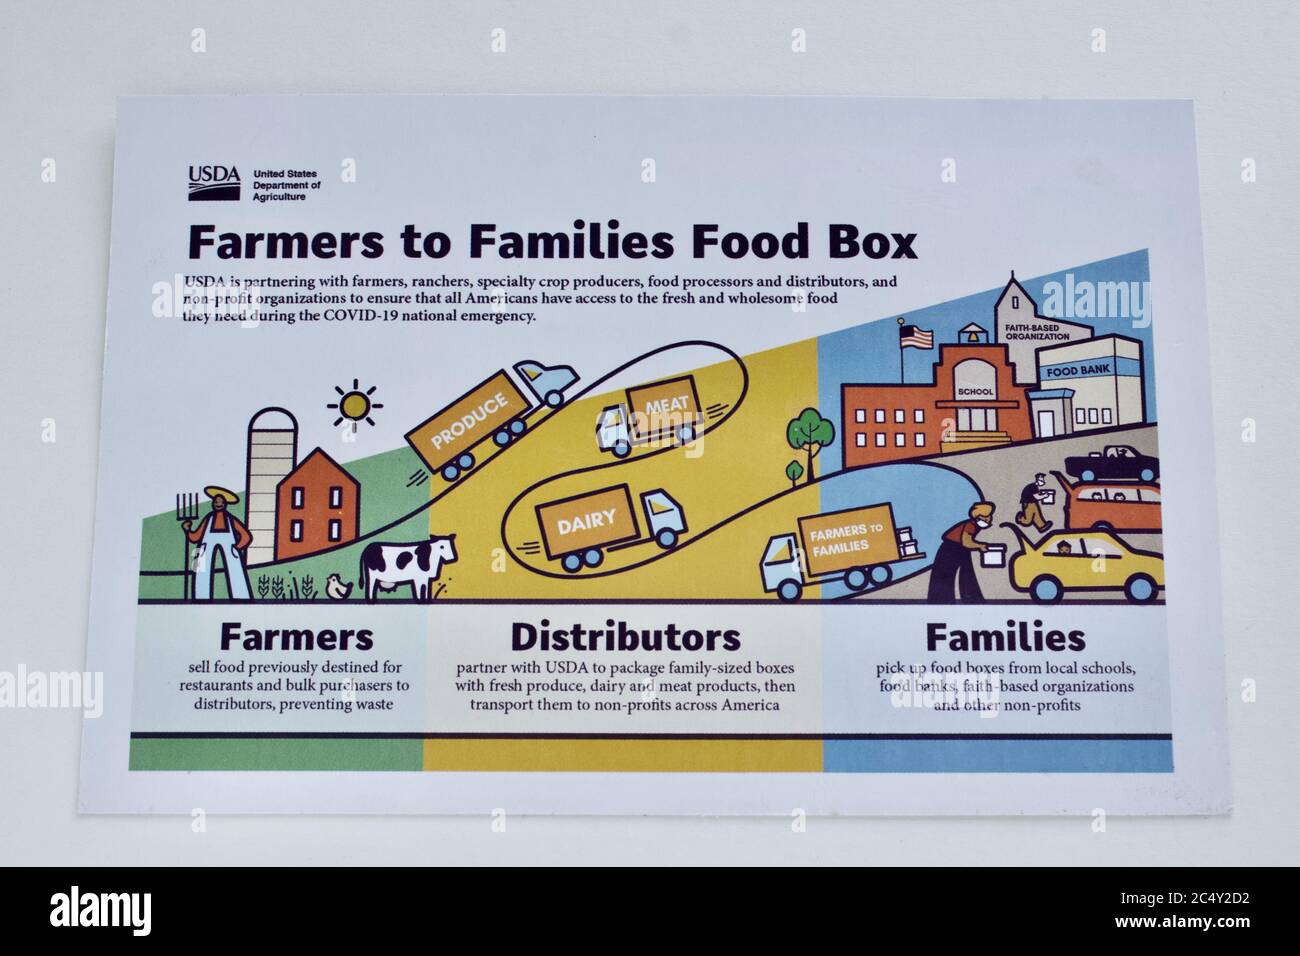 Miami, FL 6/27/2020-USDA Farmers to Families Food Box card enclosed within each food box. 20 million boxes of food to date delivered. Stock Photo